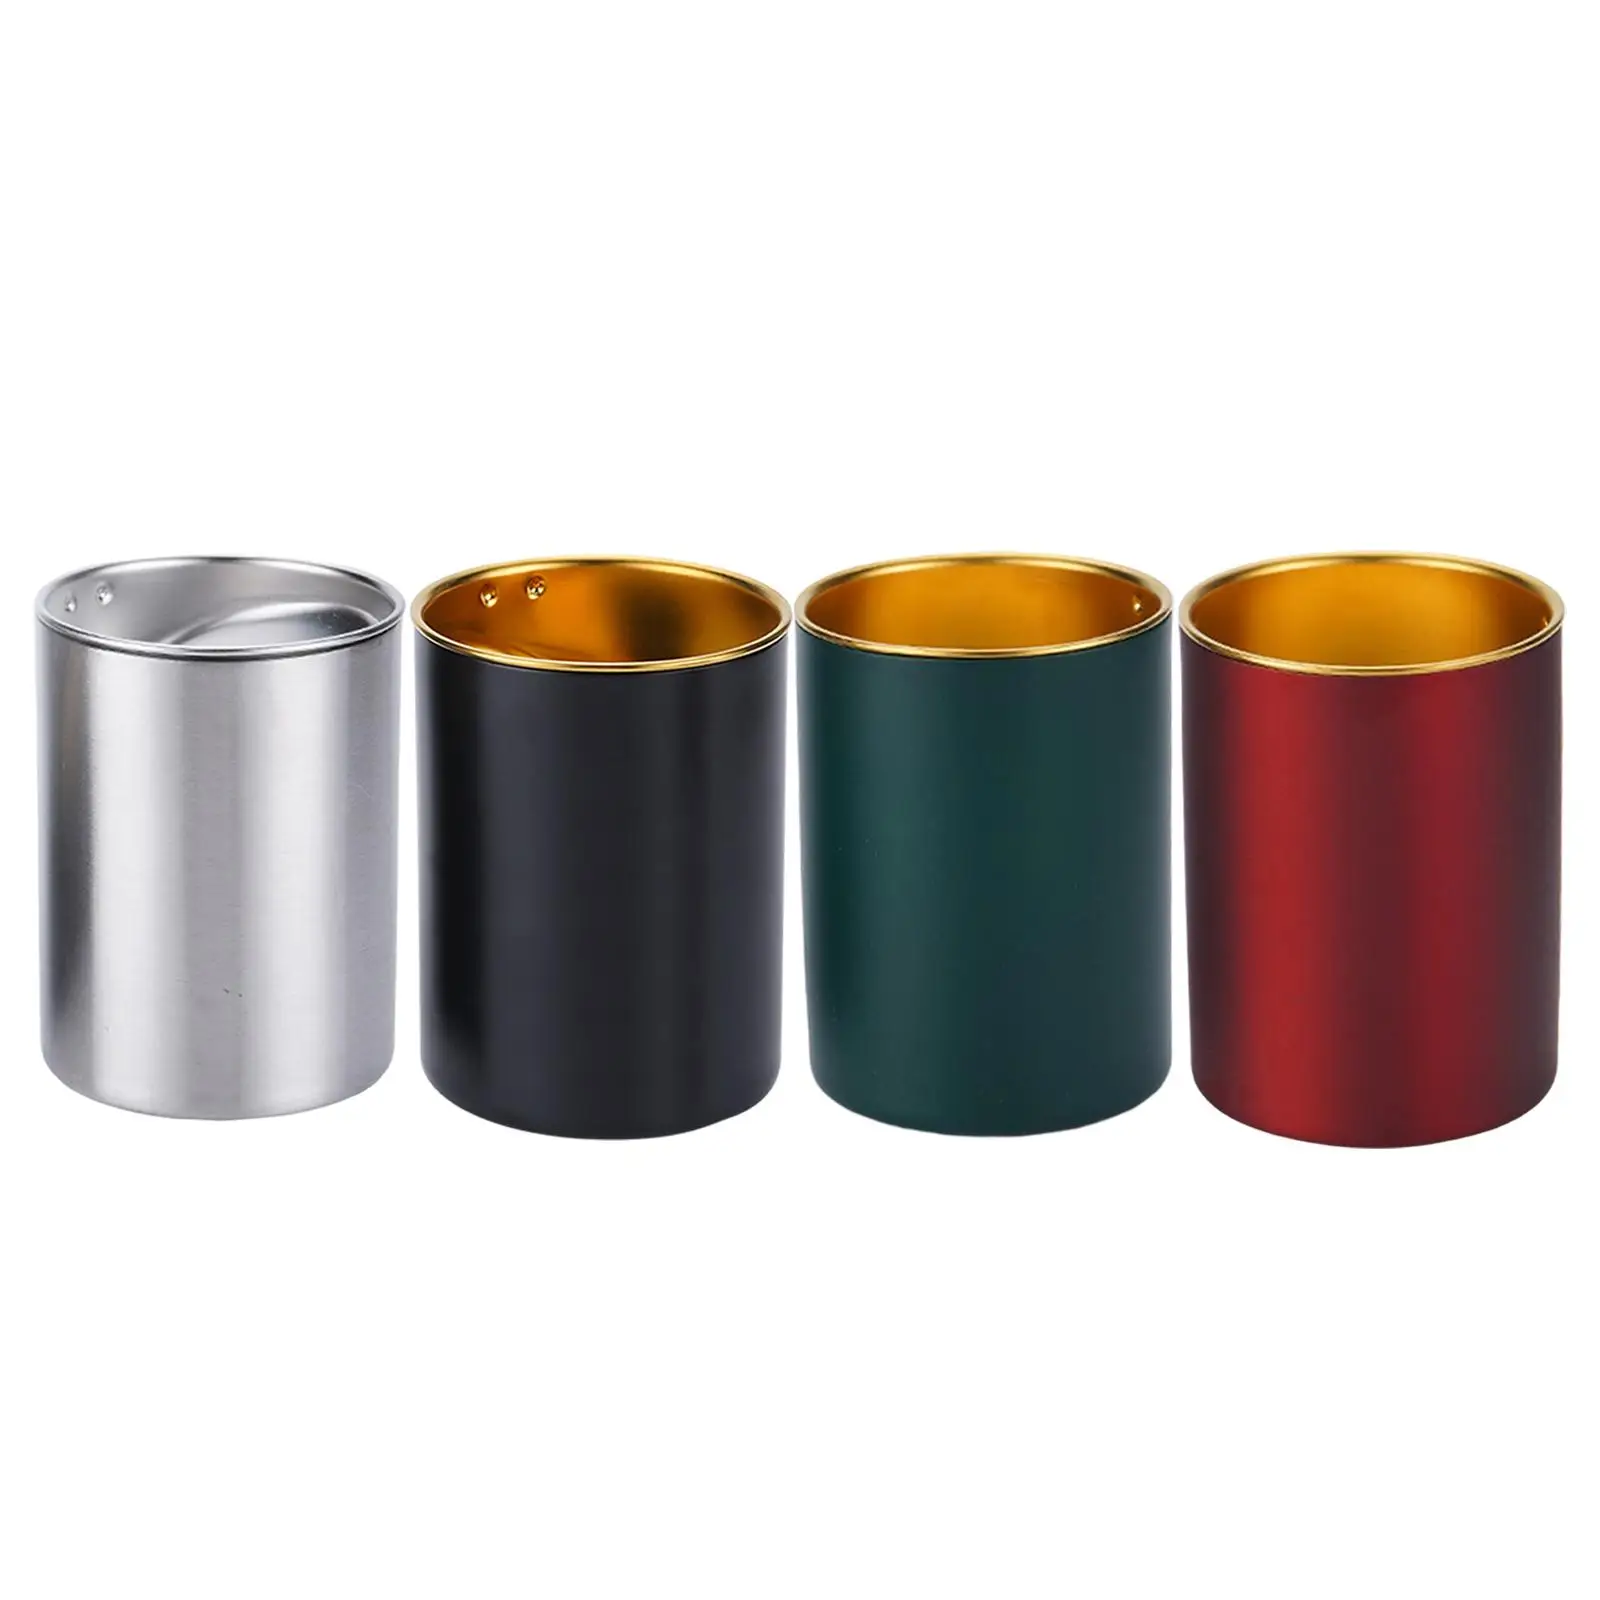 Stainless Steel Car Ashtray Cylindrical Shape Windproof Unbreakable Cigarette Ashtray for Balcony Outdoor Outside Auto Patio